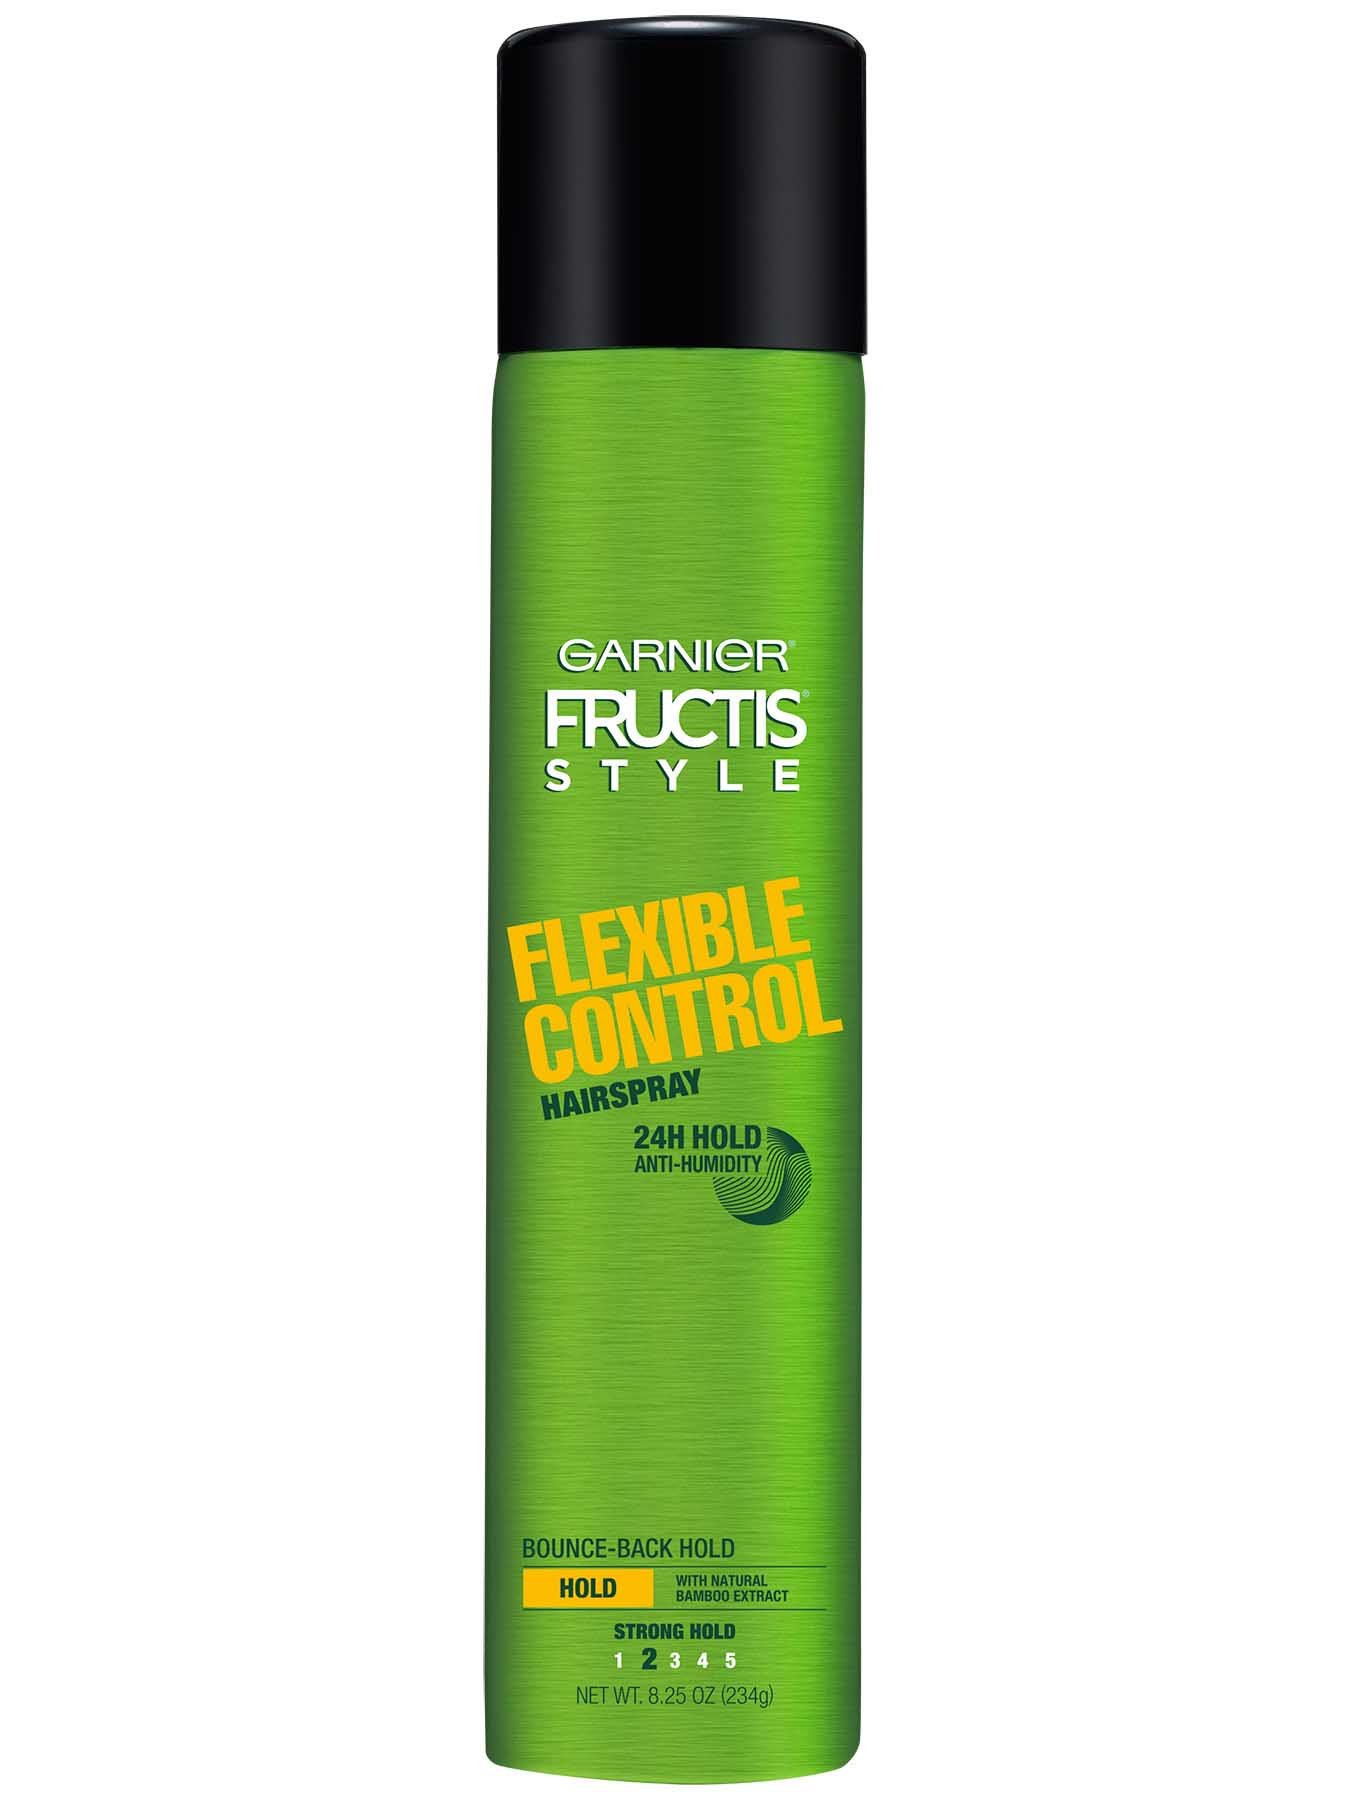 Front view of Flexible Control Anti-Humidity Aerosol Hair Spray.